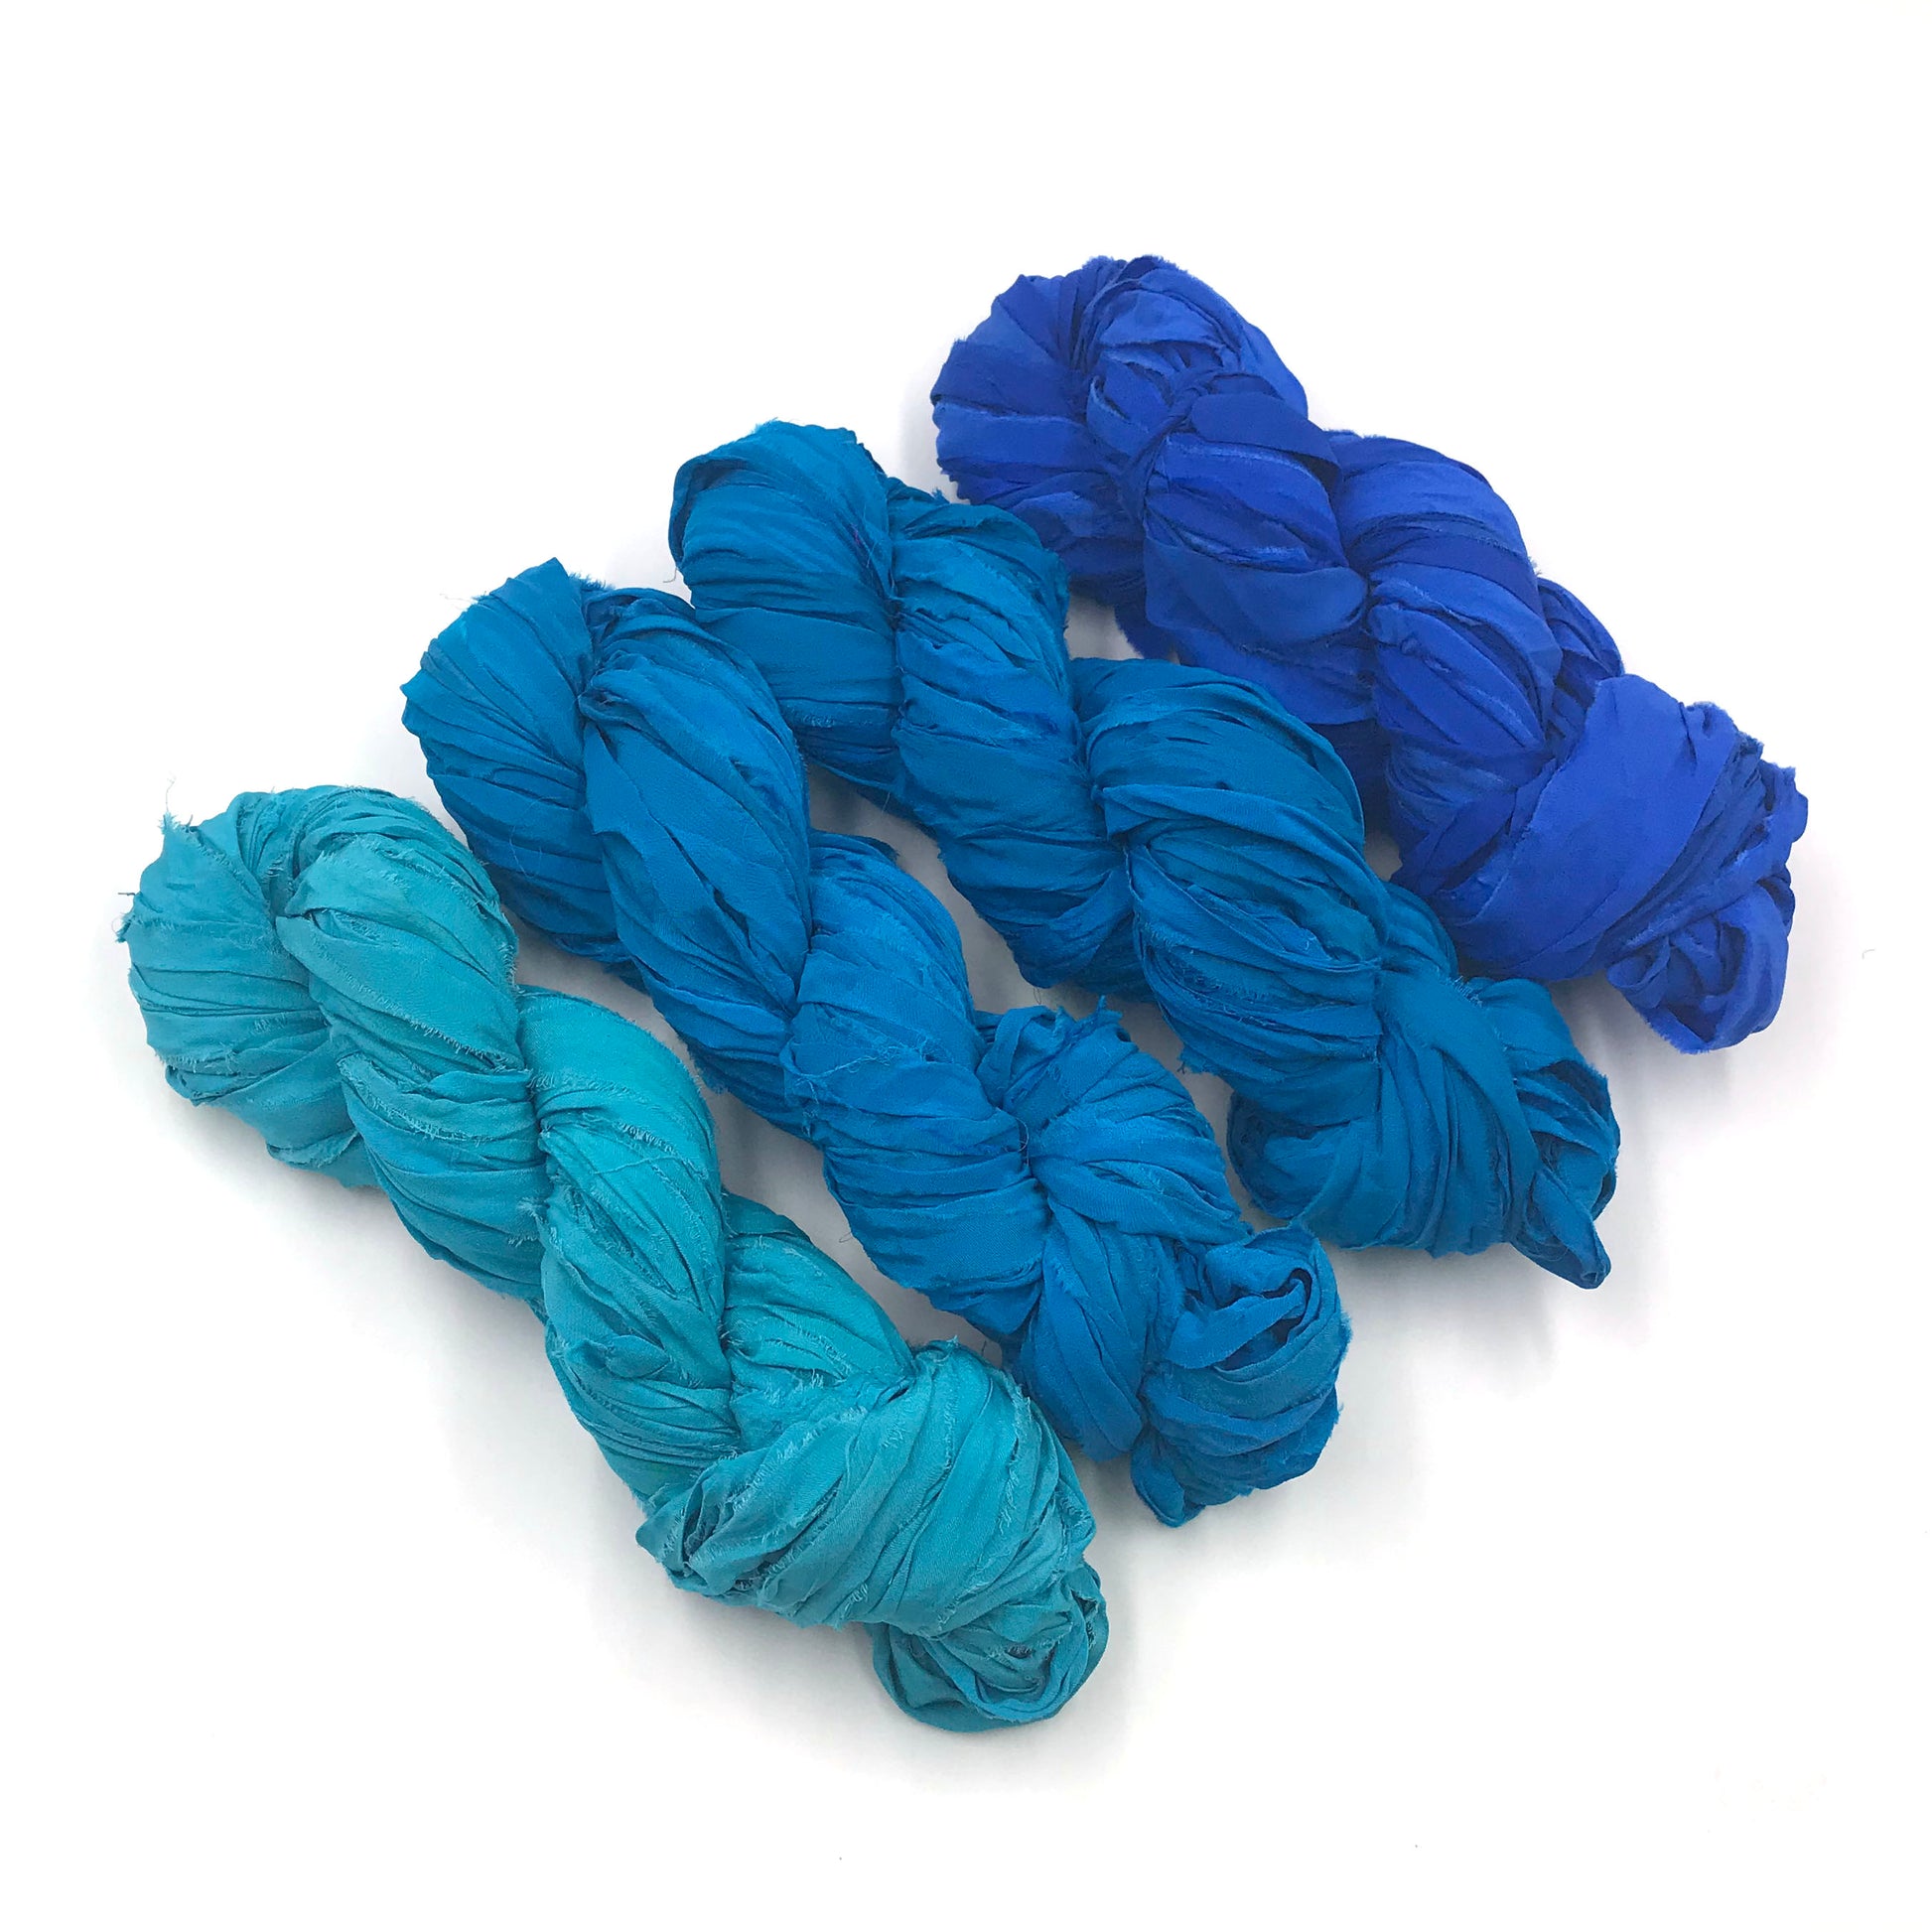 Chiffon Ribbon yarn is the colorway Ocean Waves on a white background. These colors are light aqua to deep blue.